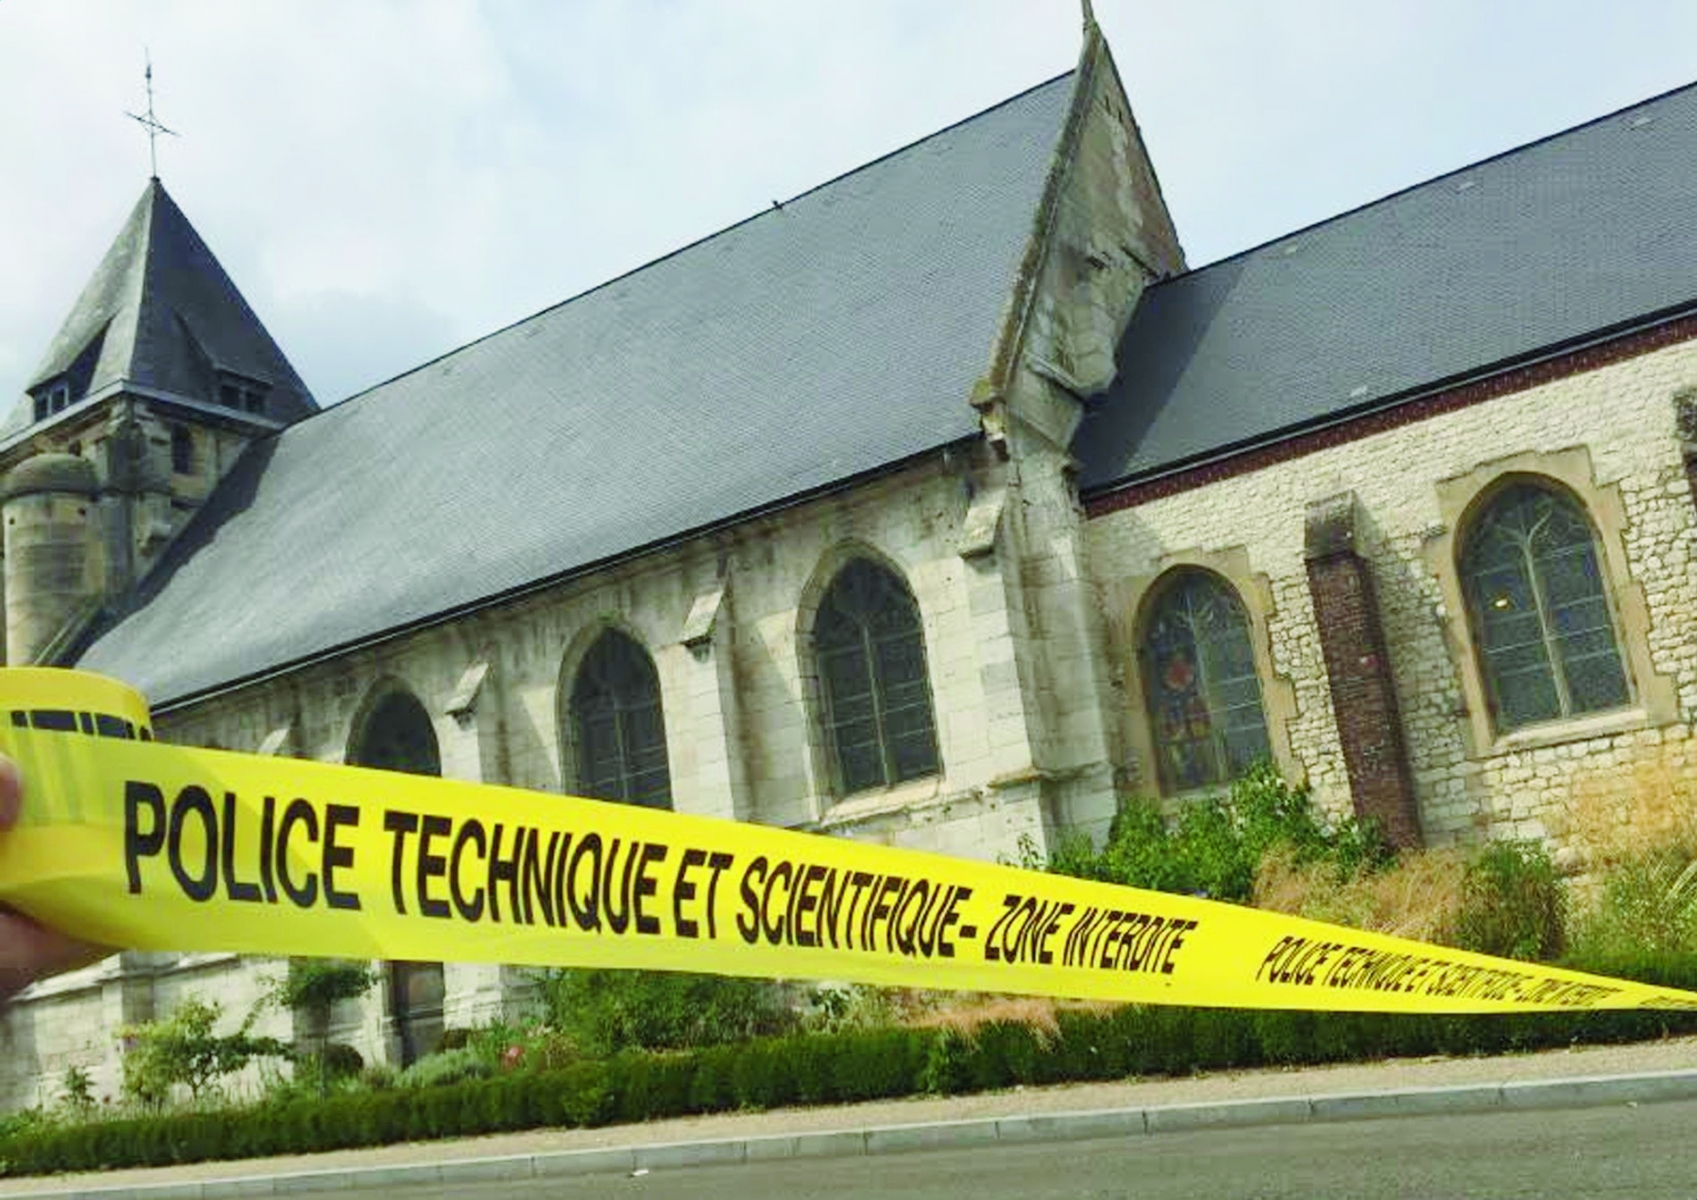 epa05442064 A handout picture provided by Police Nationale on 26 July 2016 shows police cordoning off a church where a hostage incident occured in Saint-Etienne-du-Rouvray, near Rouen, France, 26 July 2016. According to reports, two hostage takers were killed by the police after they took hostages at a church in Saint Etienne du Douvray. One of the hostages, a priest was killed by one of the perpetrators.  EPA/POLICE NATIONALE / HANDOUT BEST QUALITY AVAILABLE HANDOUT EDITORIAL USE ONLY/NO SALES FRANCE CRIME CHURCH ATTACK